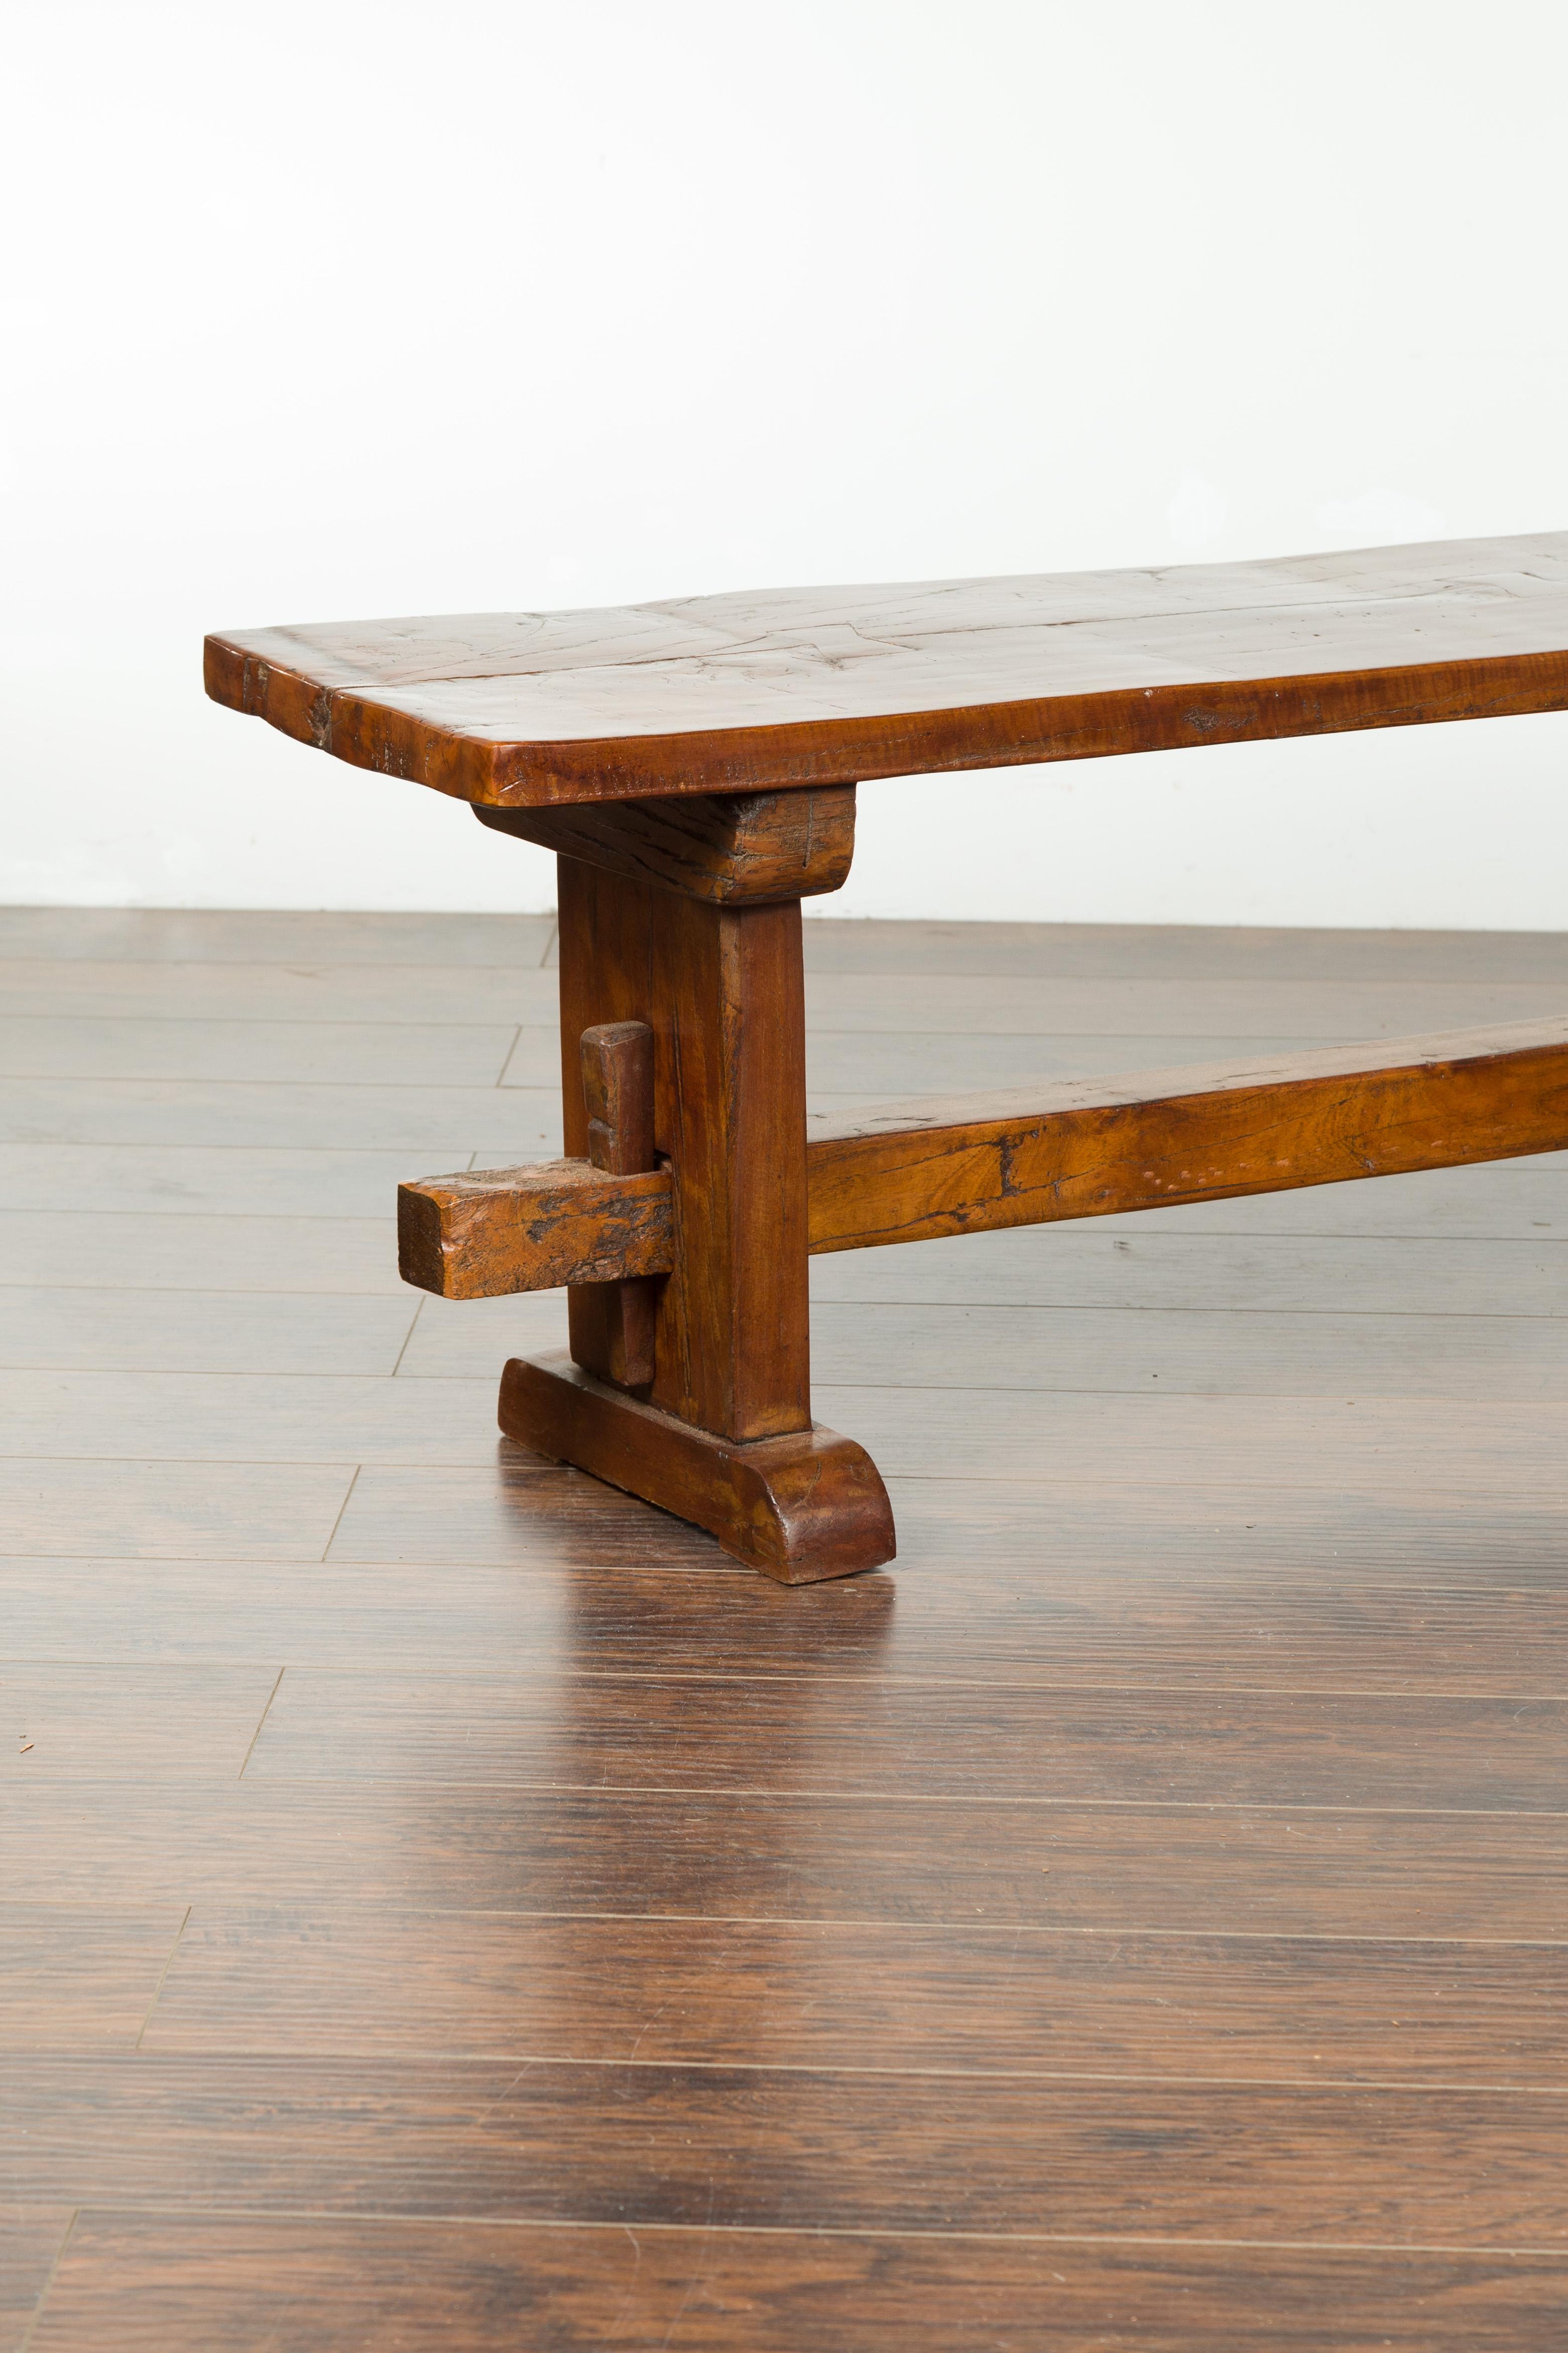 Rustic Italian Walnut Bench with Trestle Base from the Early 19th Century 8